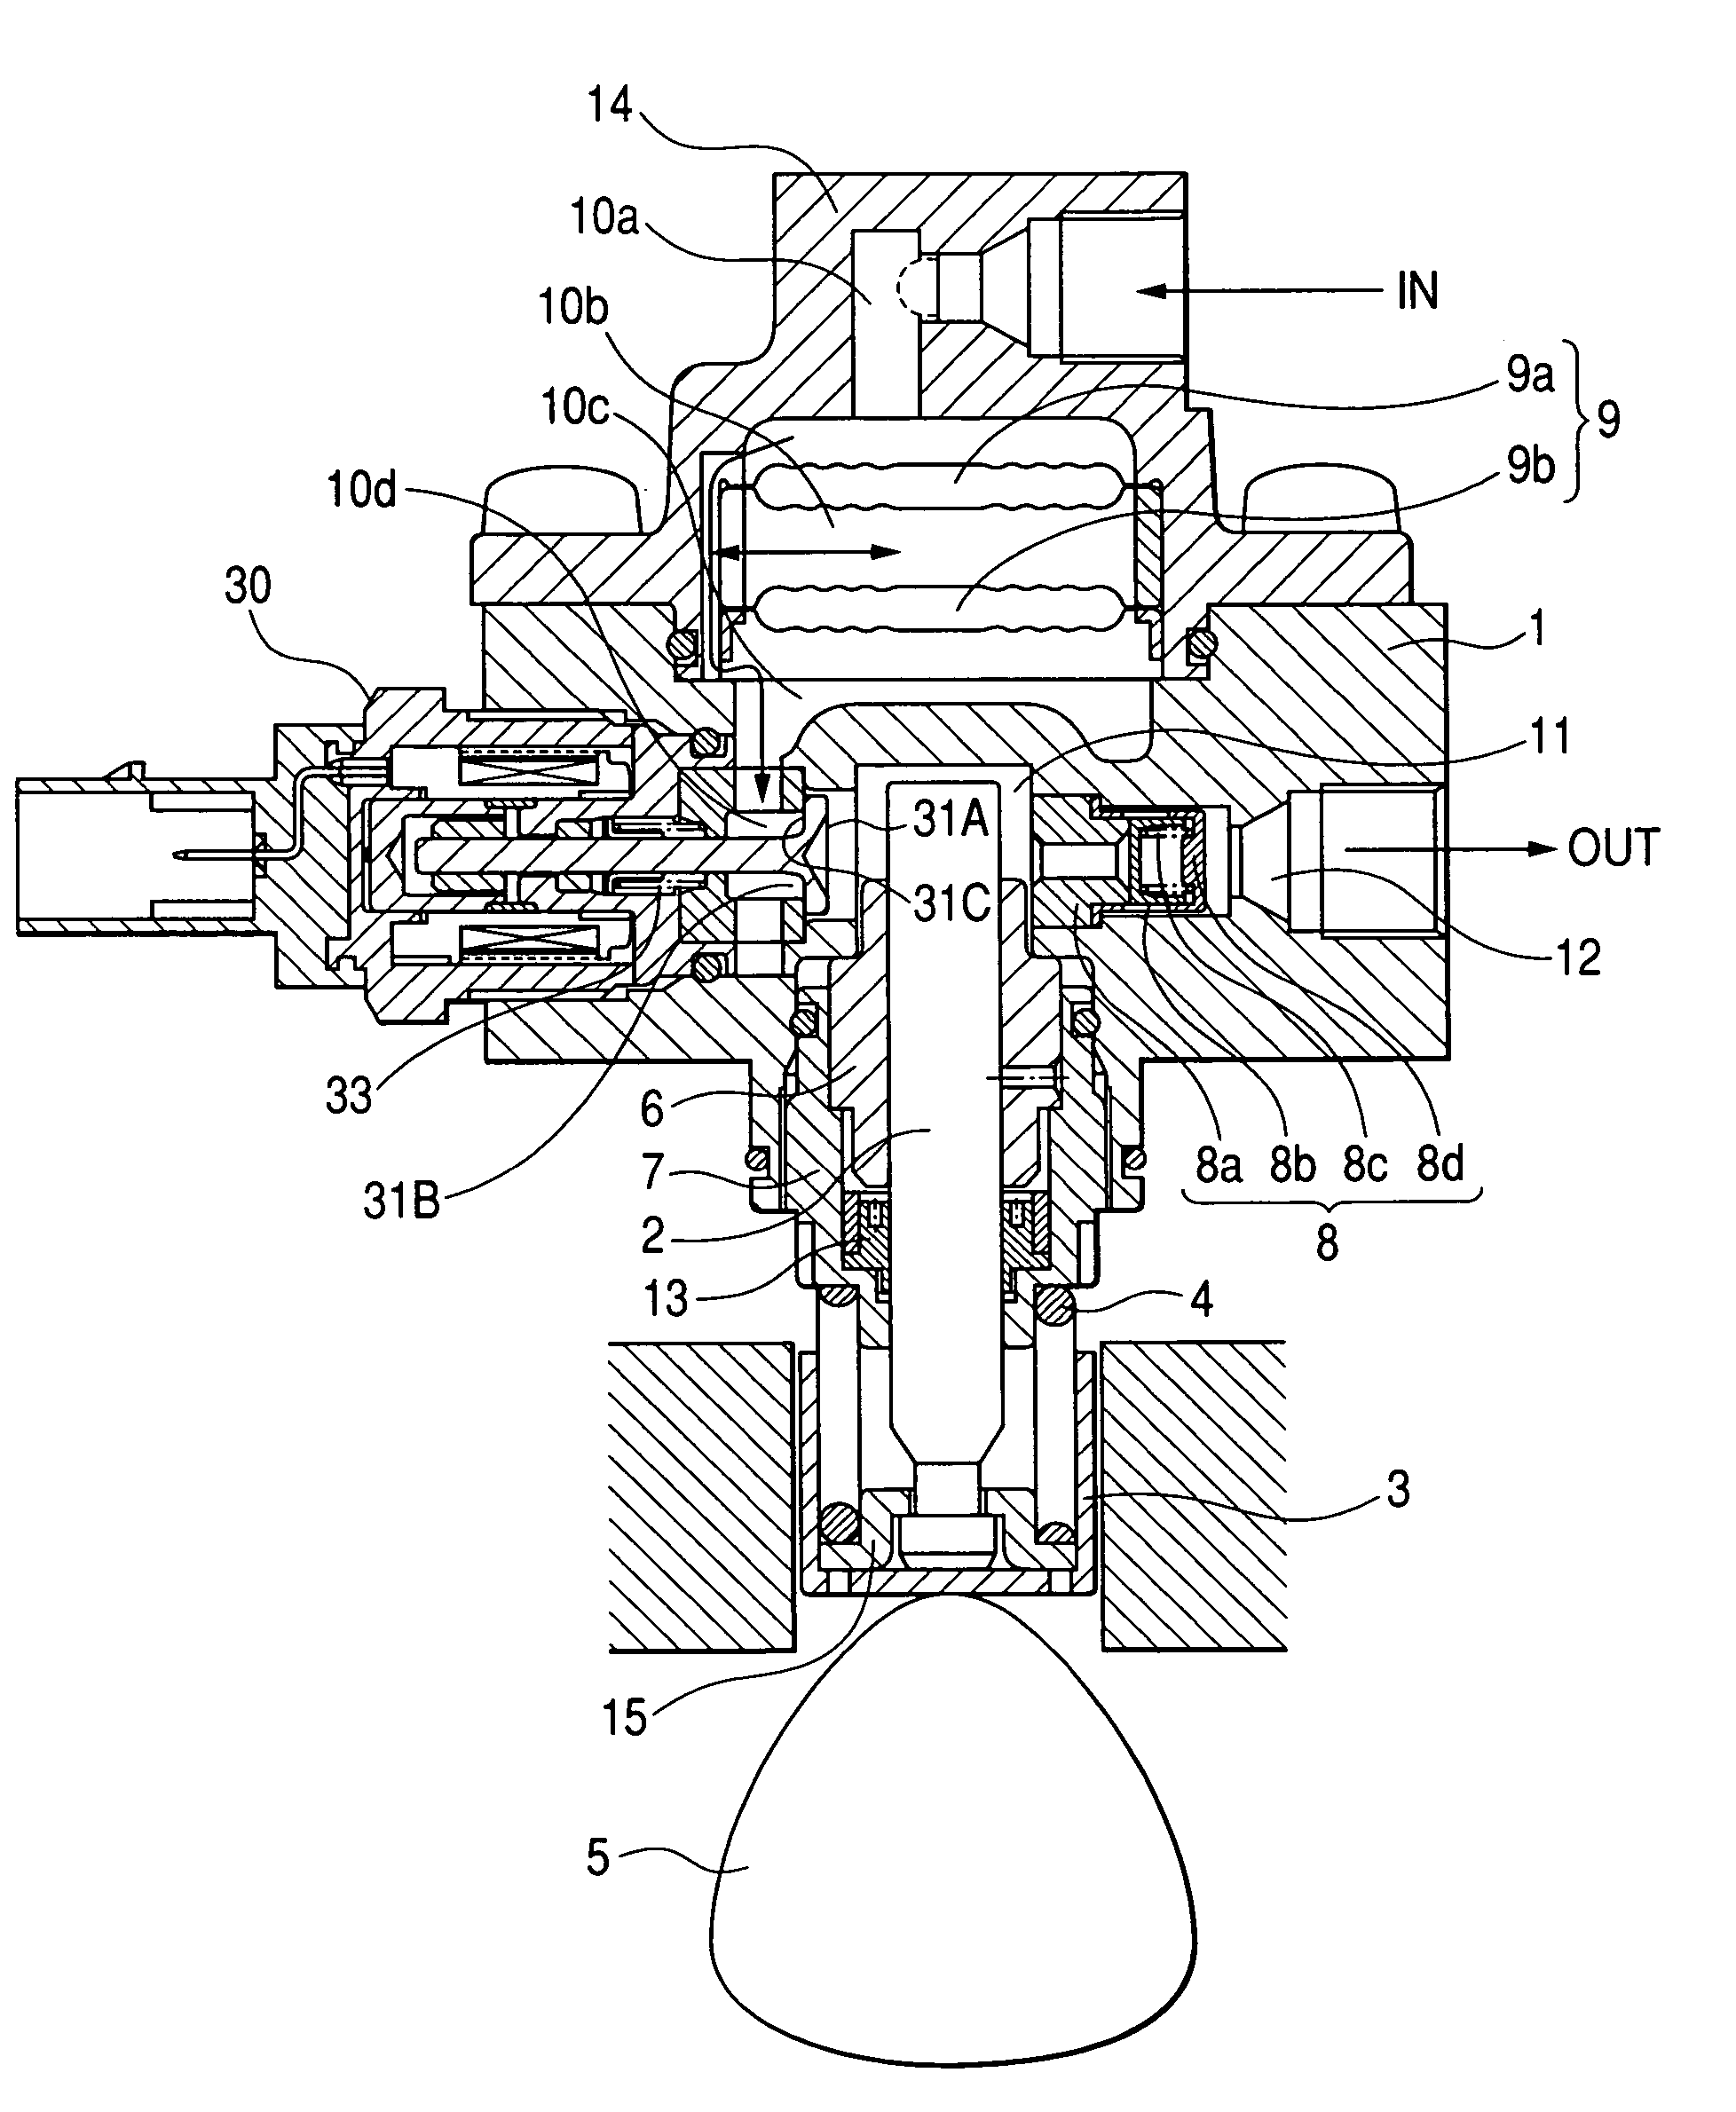 Electromagnetic drive mechanism and a high-pressure fuel supply pump